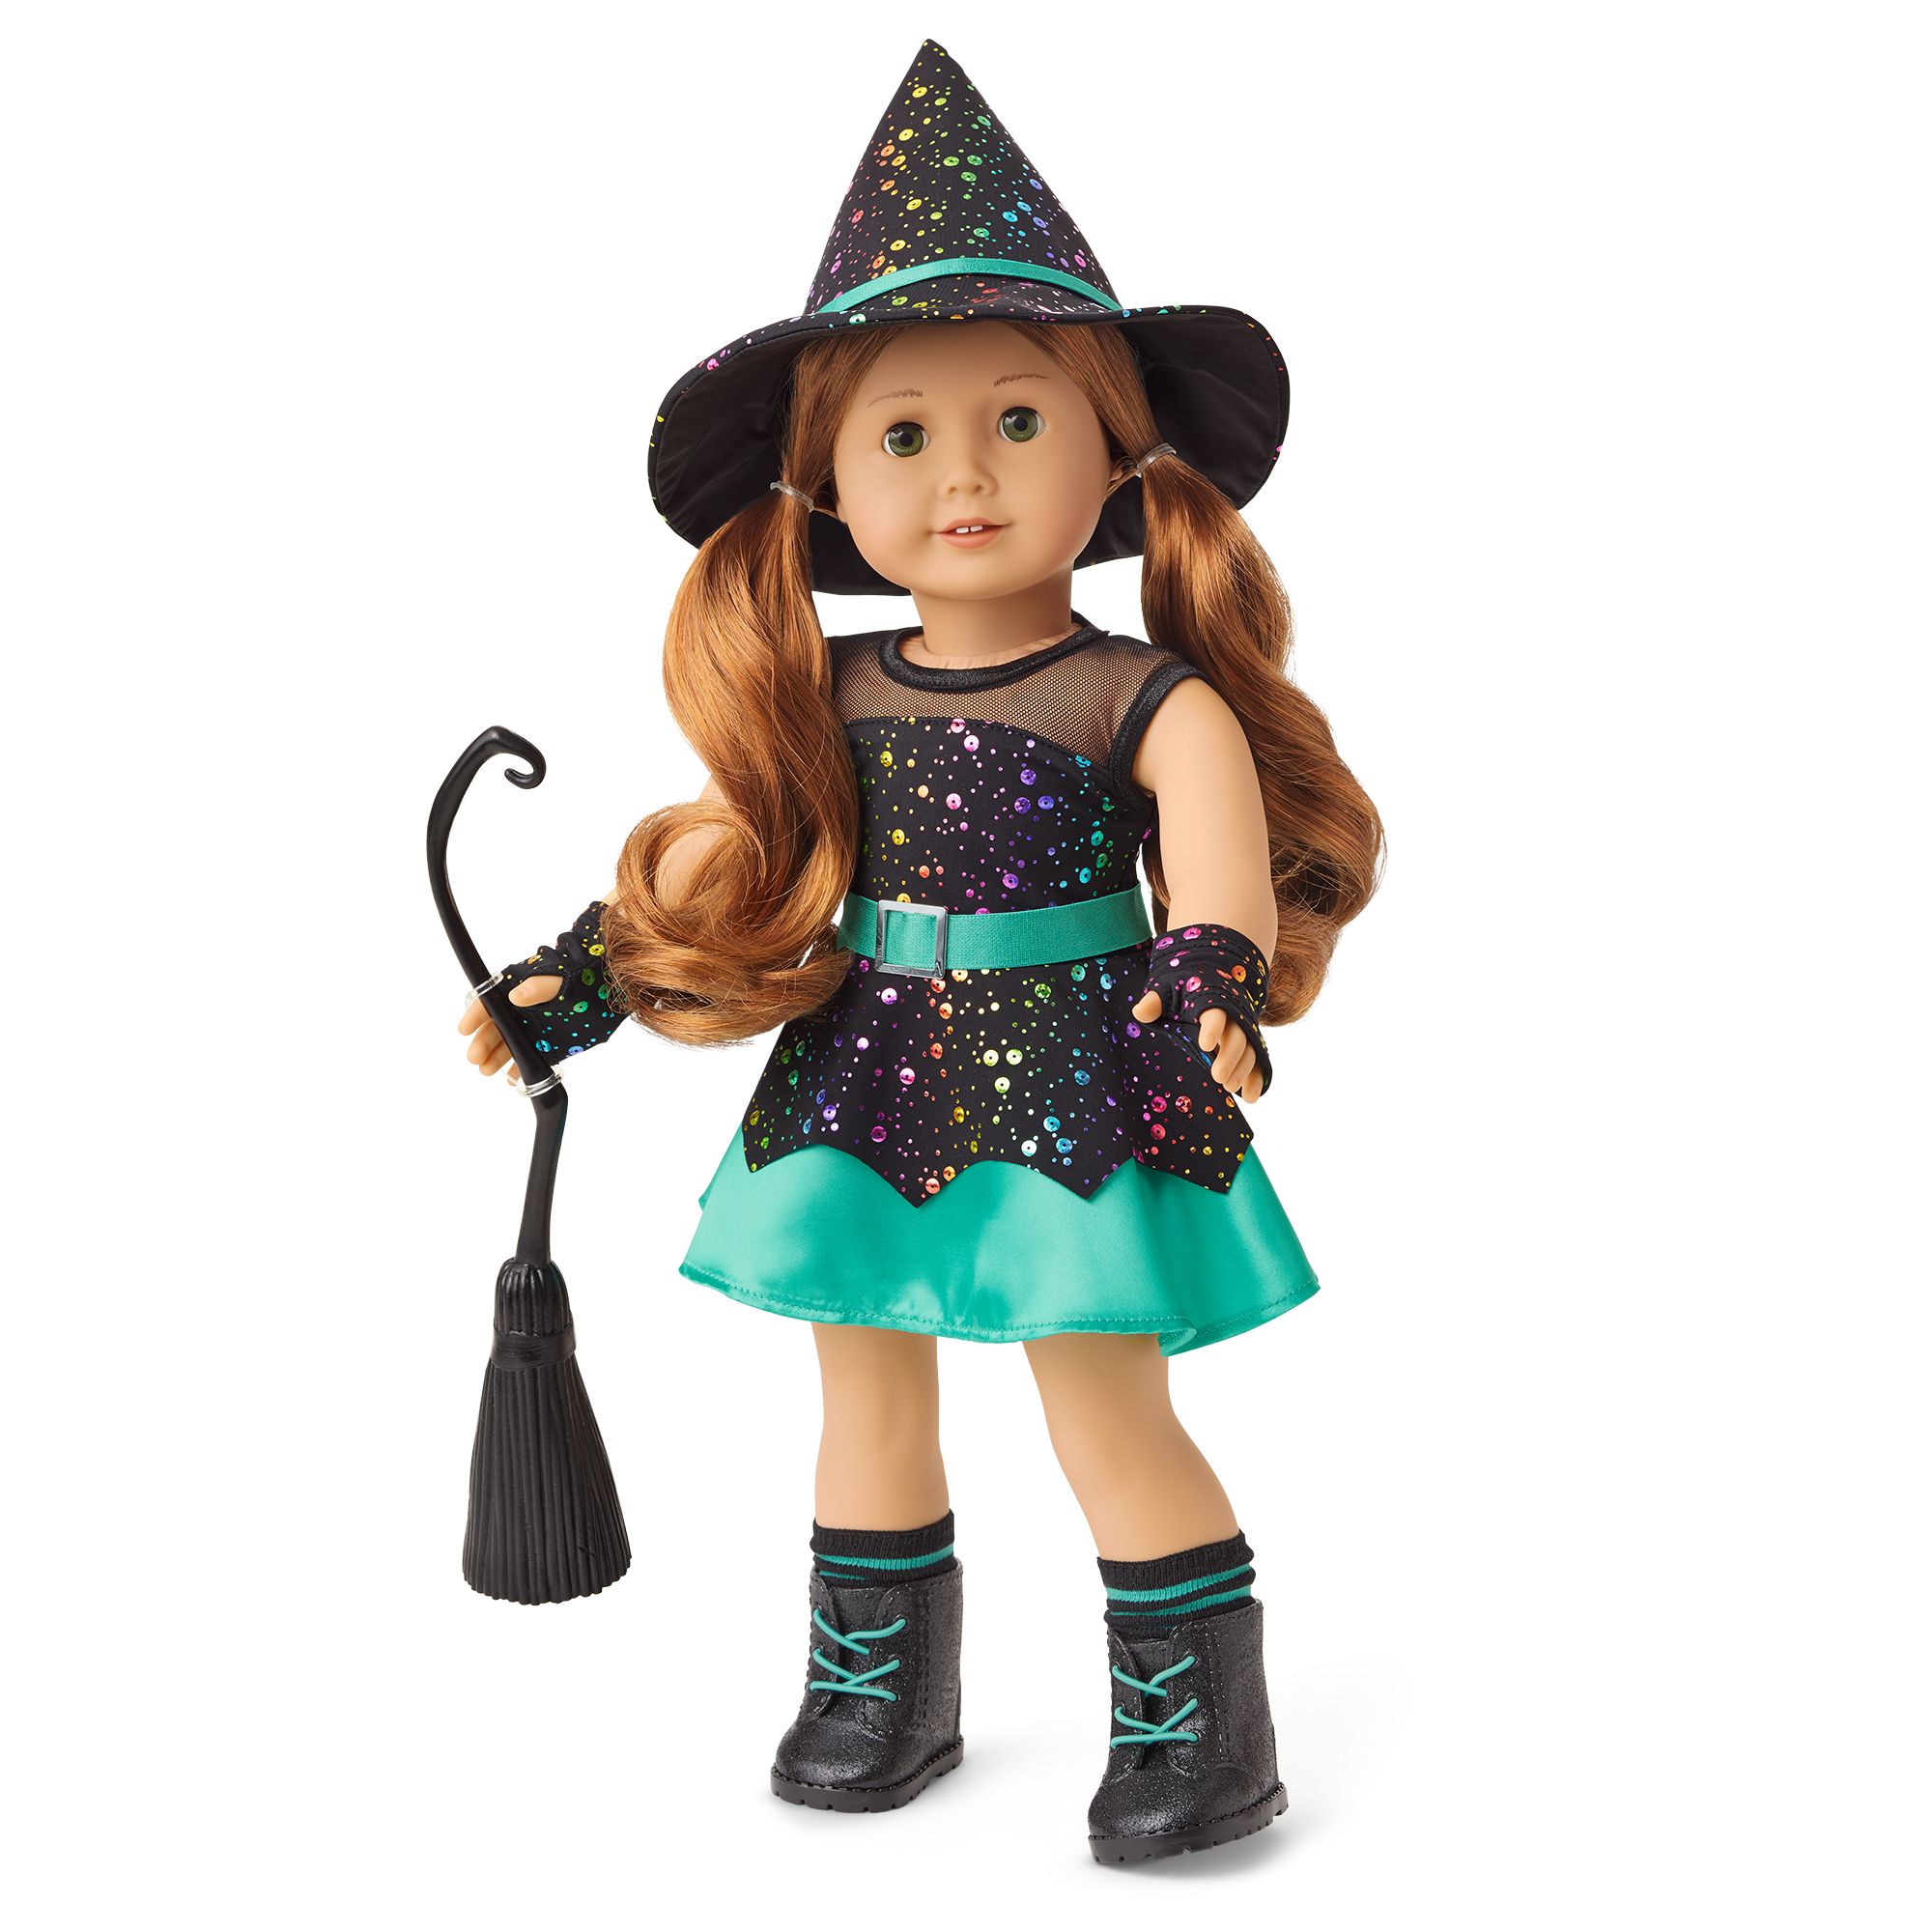 Brand New American Girl BROOM For Halloween Witch Costume 